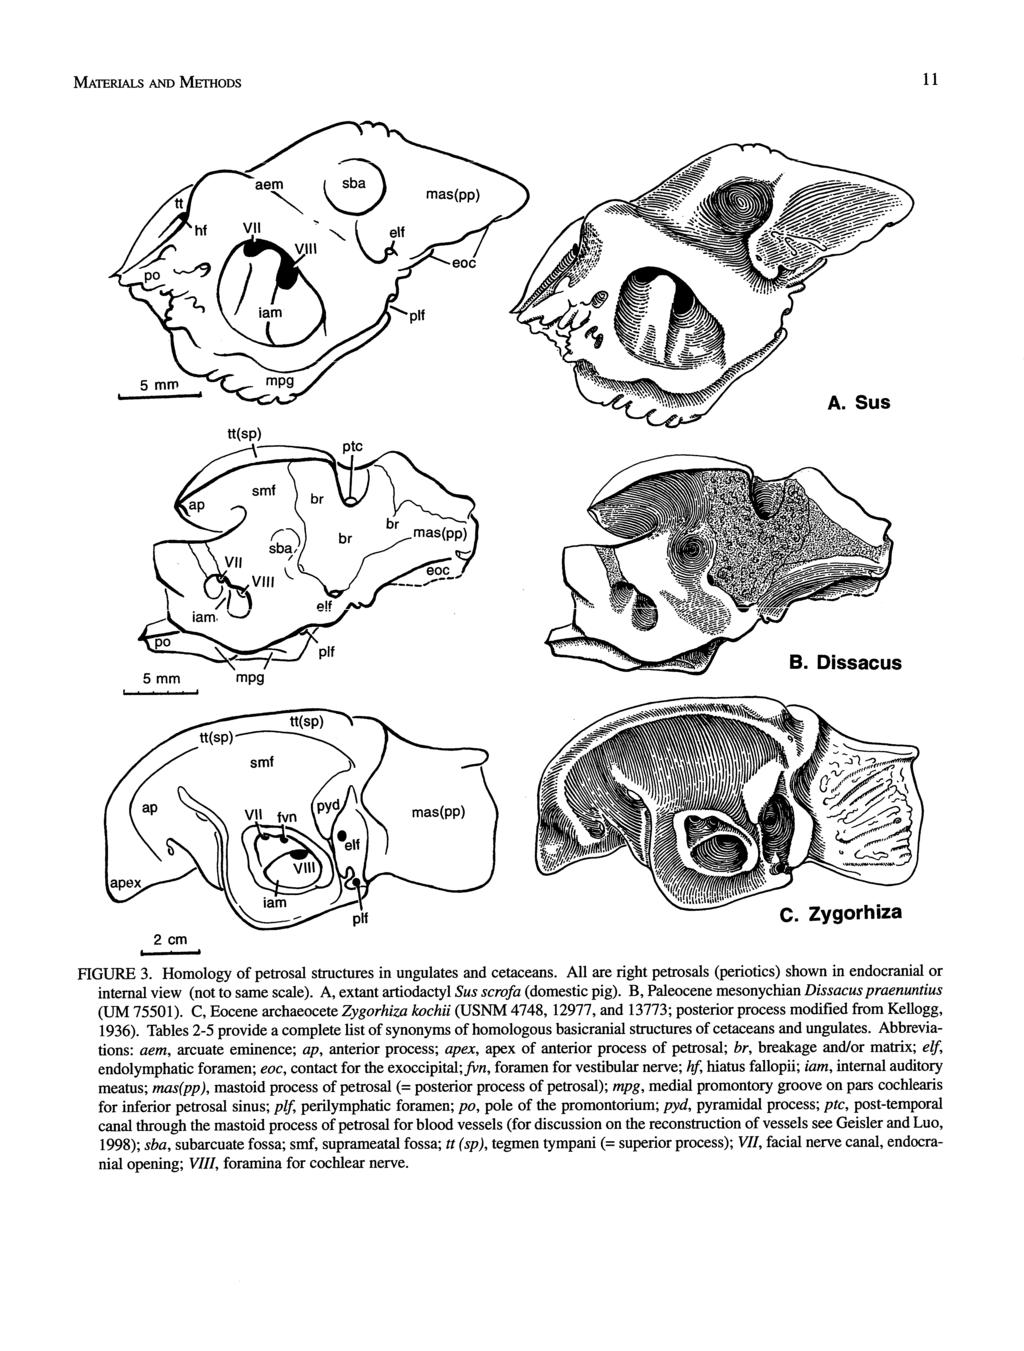 B. Dissacus FIGURE 3. Homology of petrosal structures in ungulates and cetaceans. All are right petrosals (periotics) shown in endocranial or internal view (not to same scale).